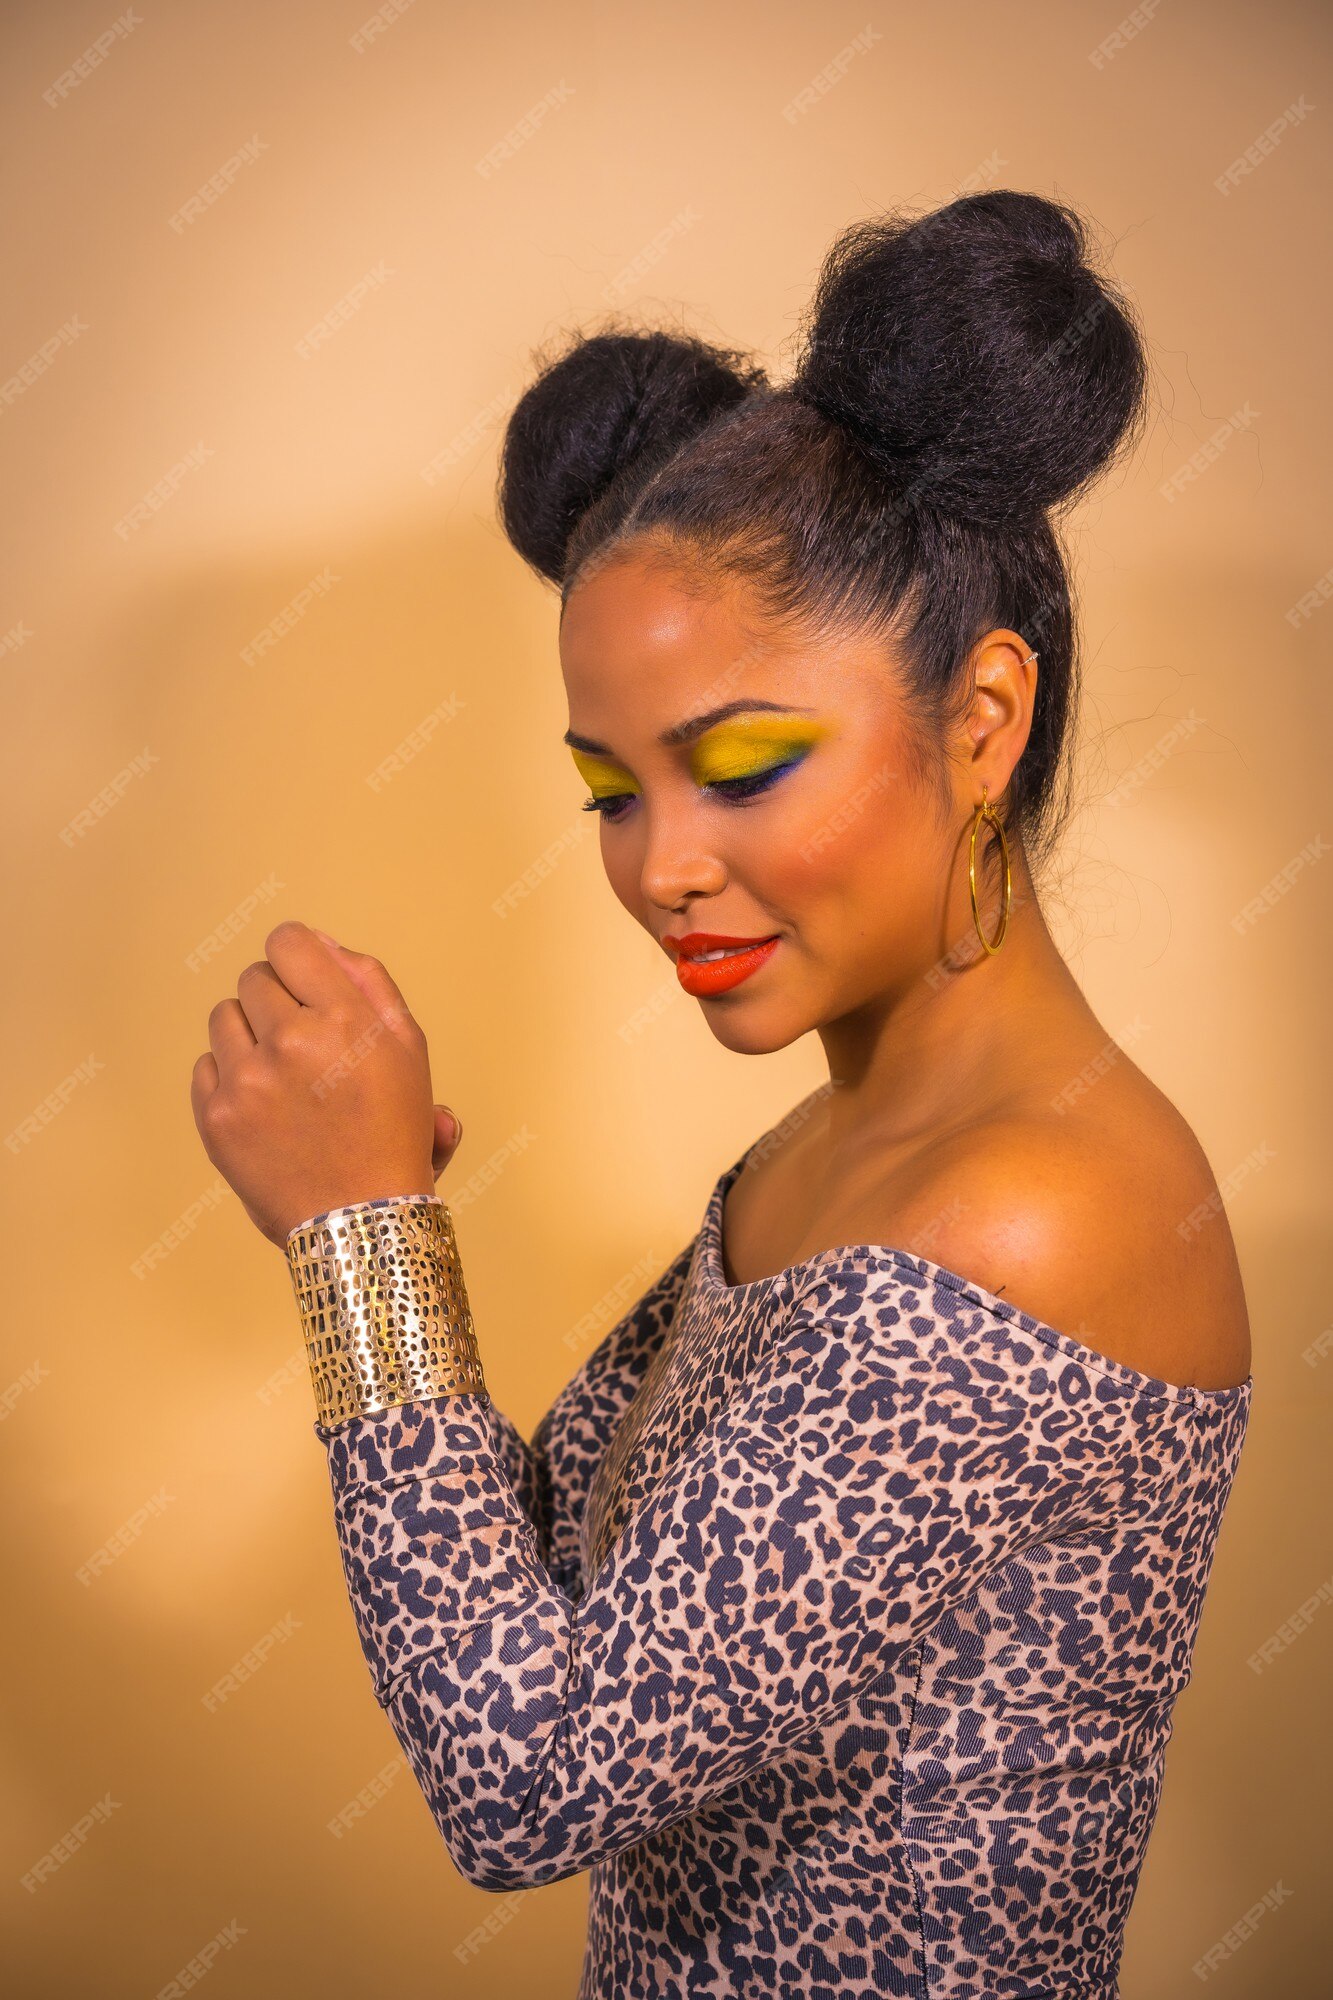 Premium Photo | Portrait of a woman with bright makeup and two side bun  hairstyle doing a claw gesture